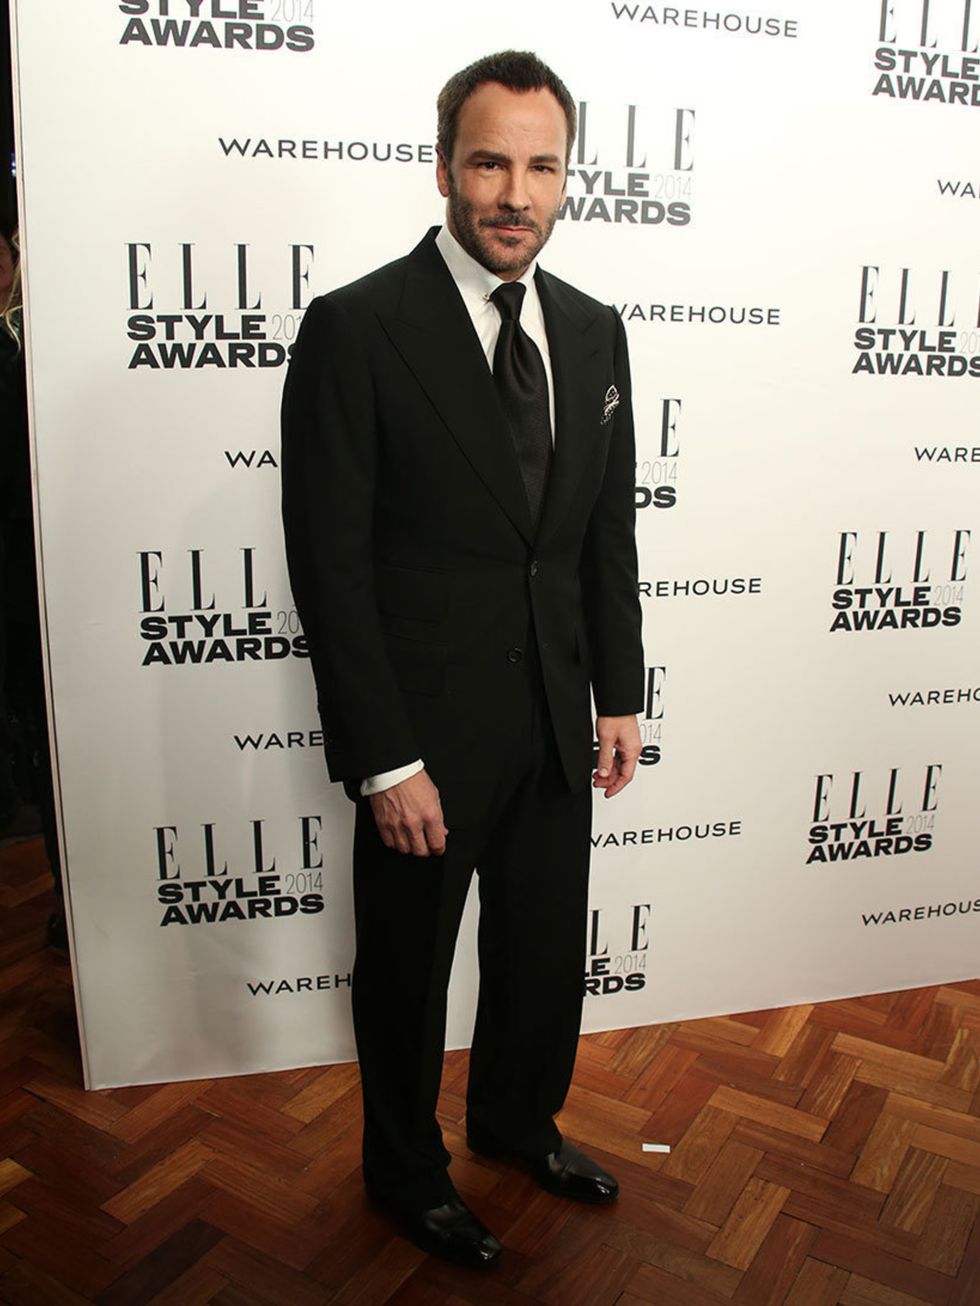 <p><a href="http://www.elleuk.com/fashion/news/london-fashion-week-catwalk-show-review-autumn-winter-2014-giles-and-tom-ford">Tom Ford</a> at the ELLE Style Awards 2014</p>